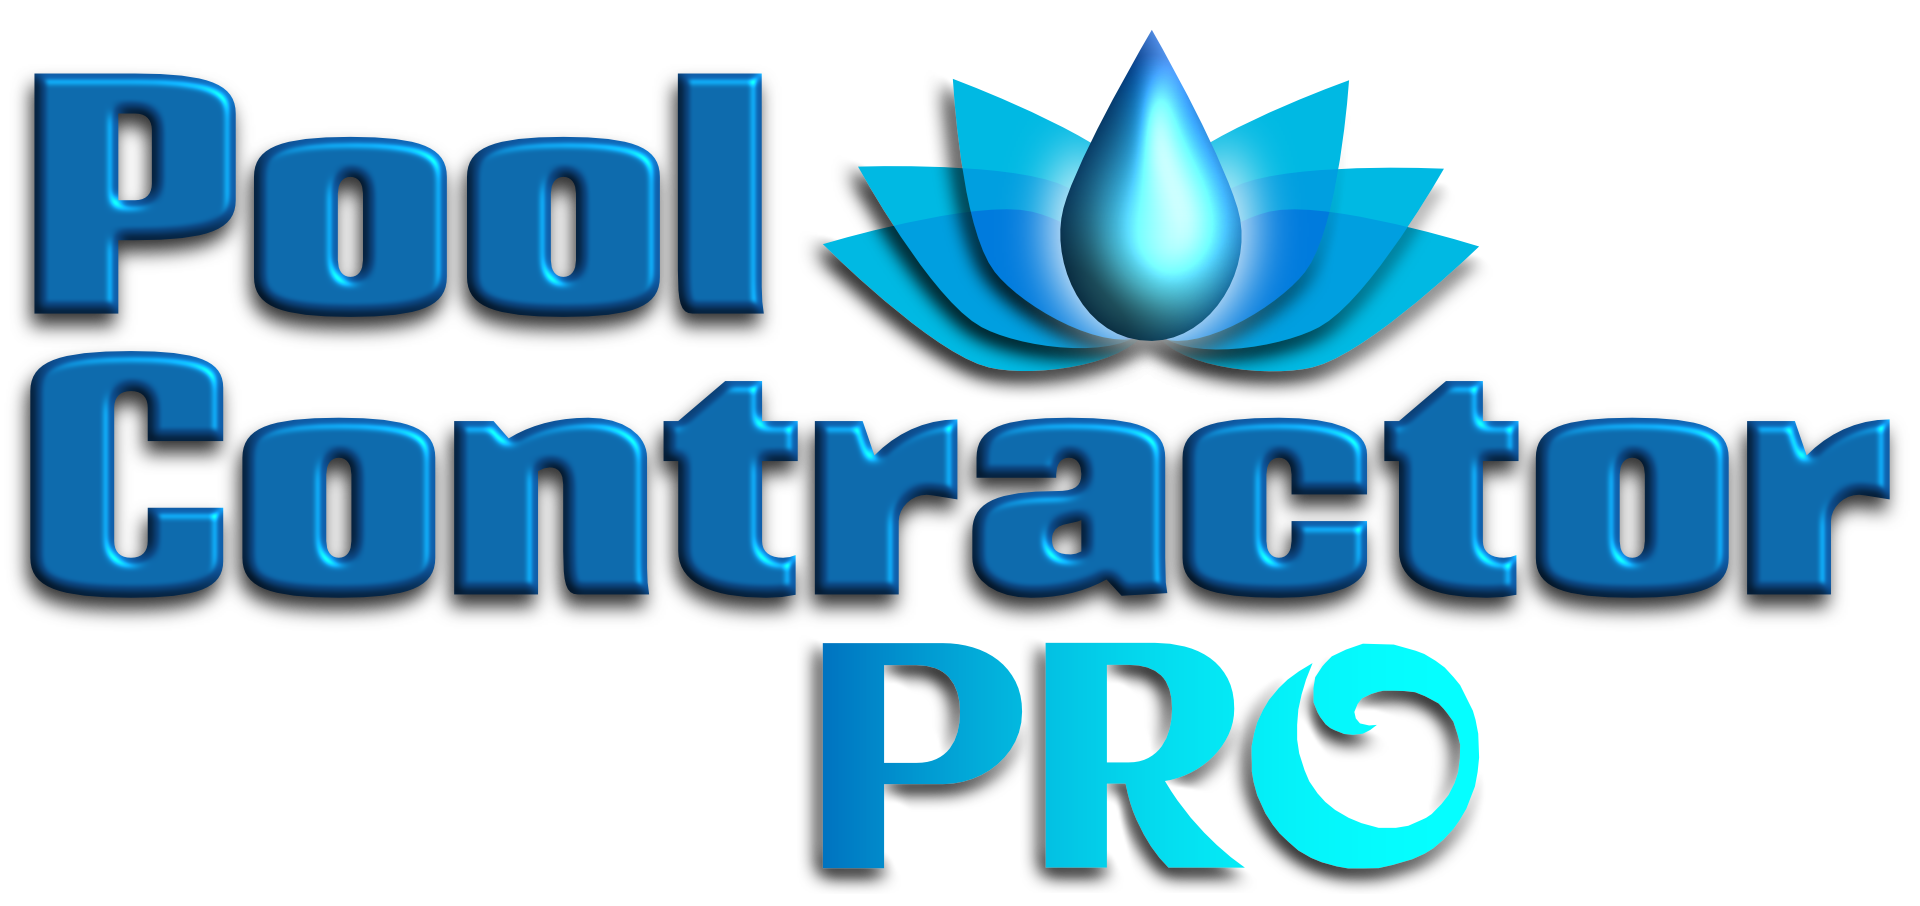 Pool Contractor Pro Logo with lotus